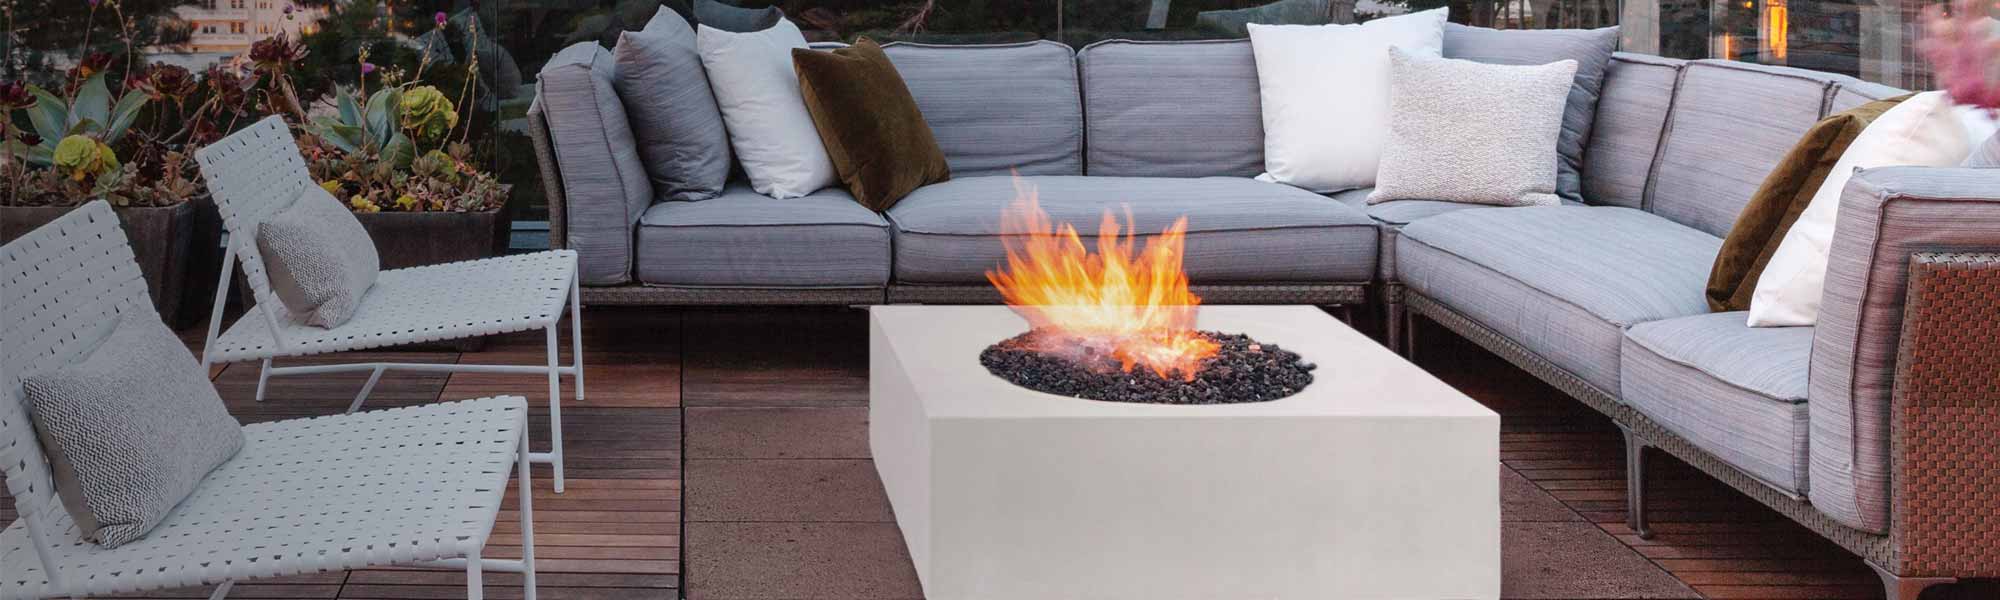 New Outdoor Patio Fire Pit Tables Blog, Solstice Fire Pit